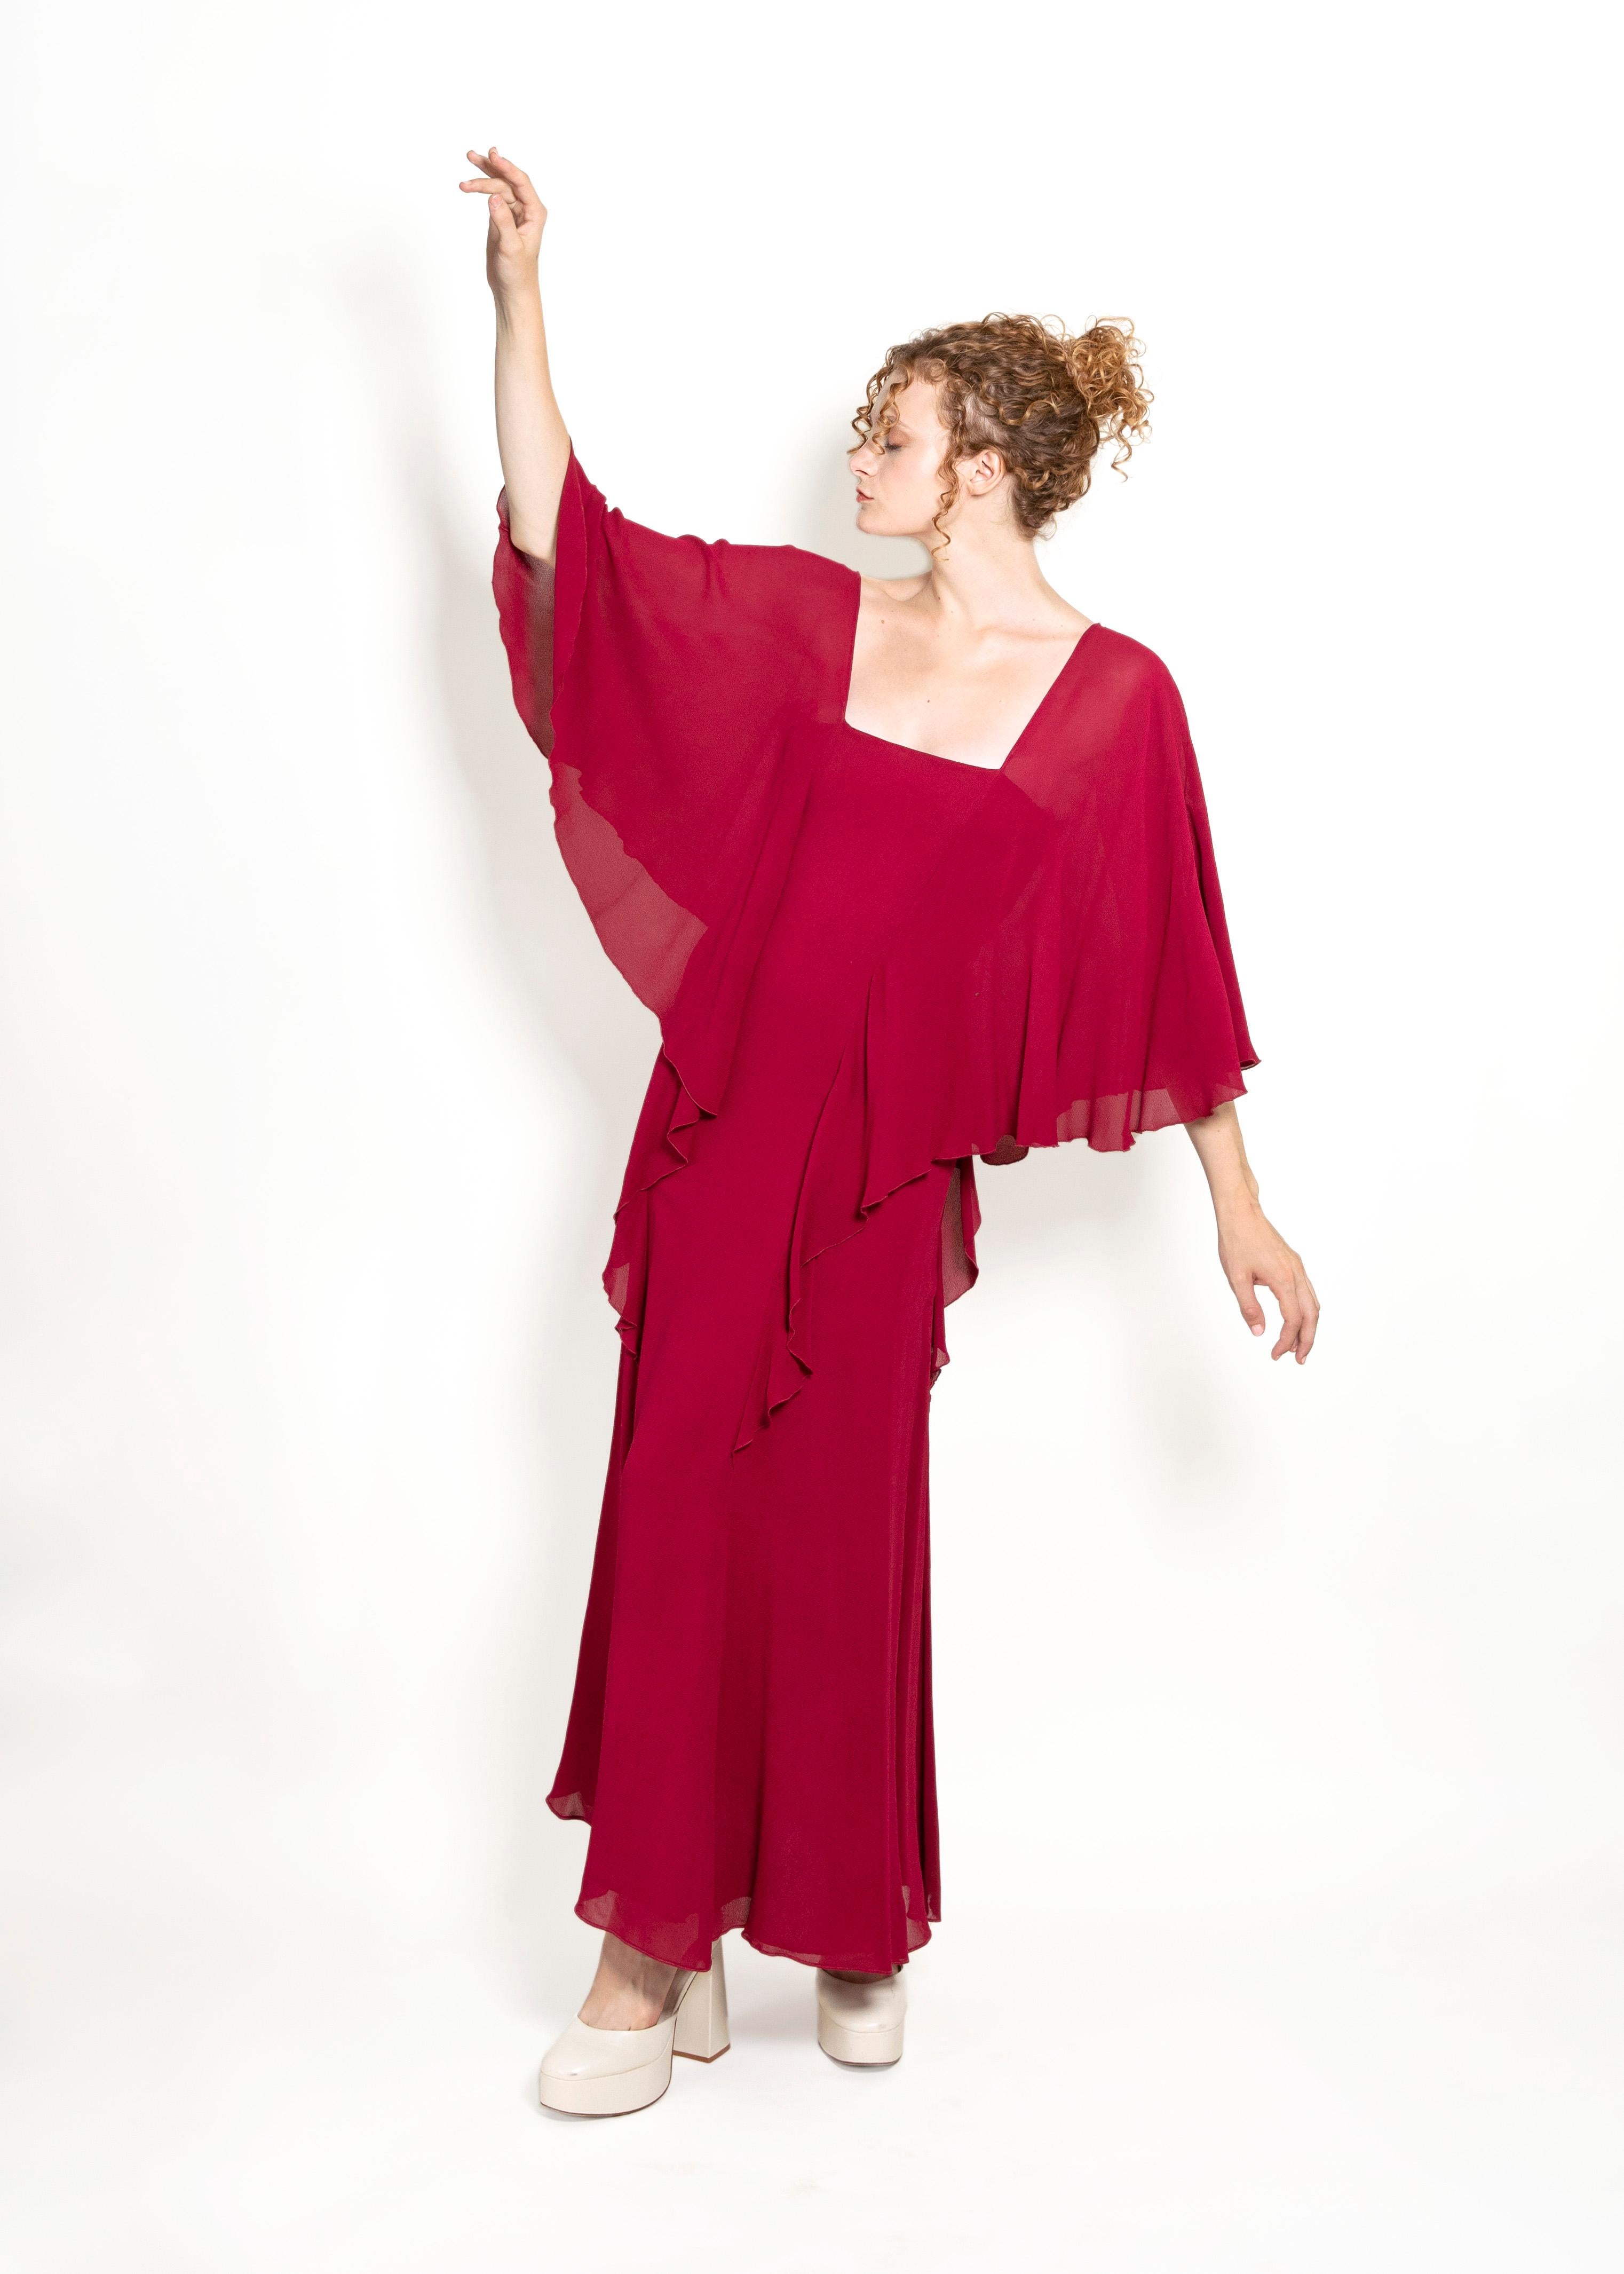 Feel the luxurious embrace of Giorgio's of Beverly Hills' Berry Boho Dress. Crafted with berry colored angel wings, ruffles, and a square neck, this dress is sure to add a touch of sophistication to your wardrobe. Make a statement with this